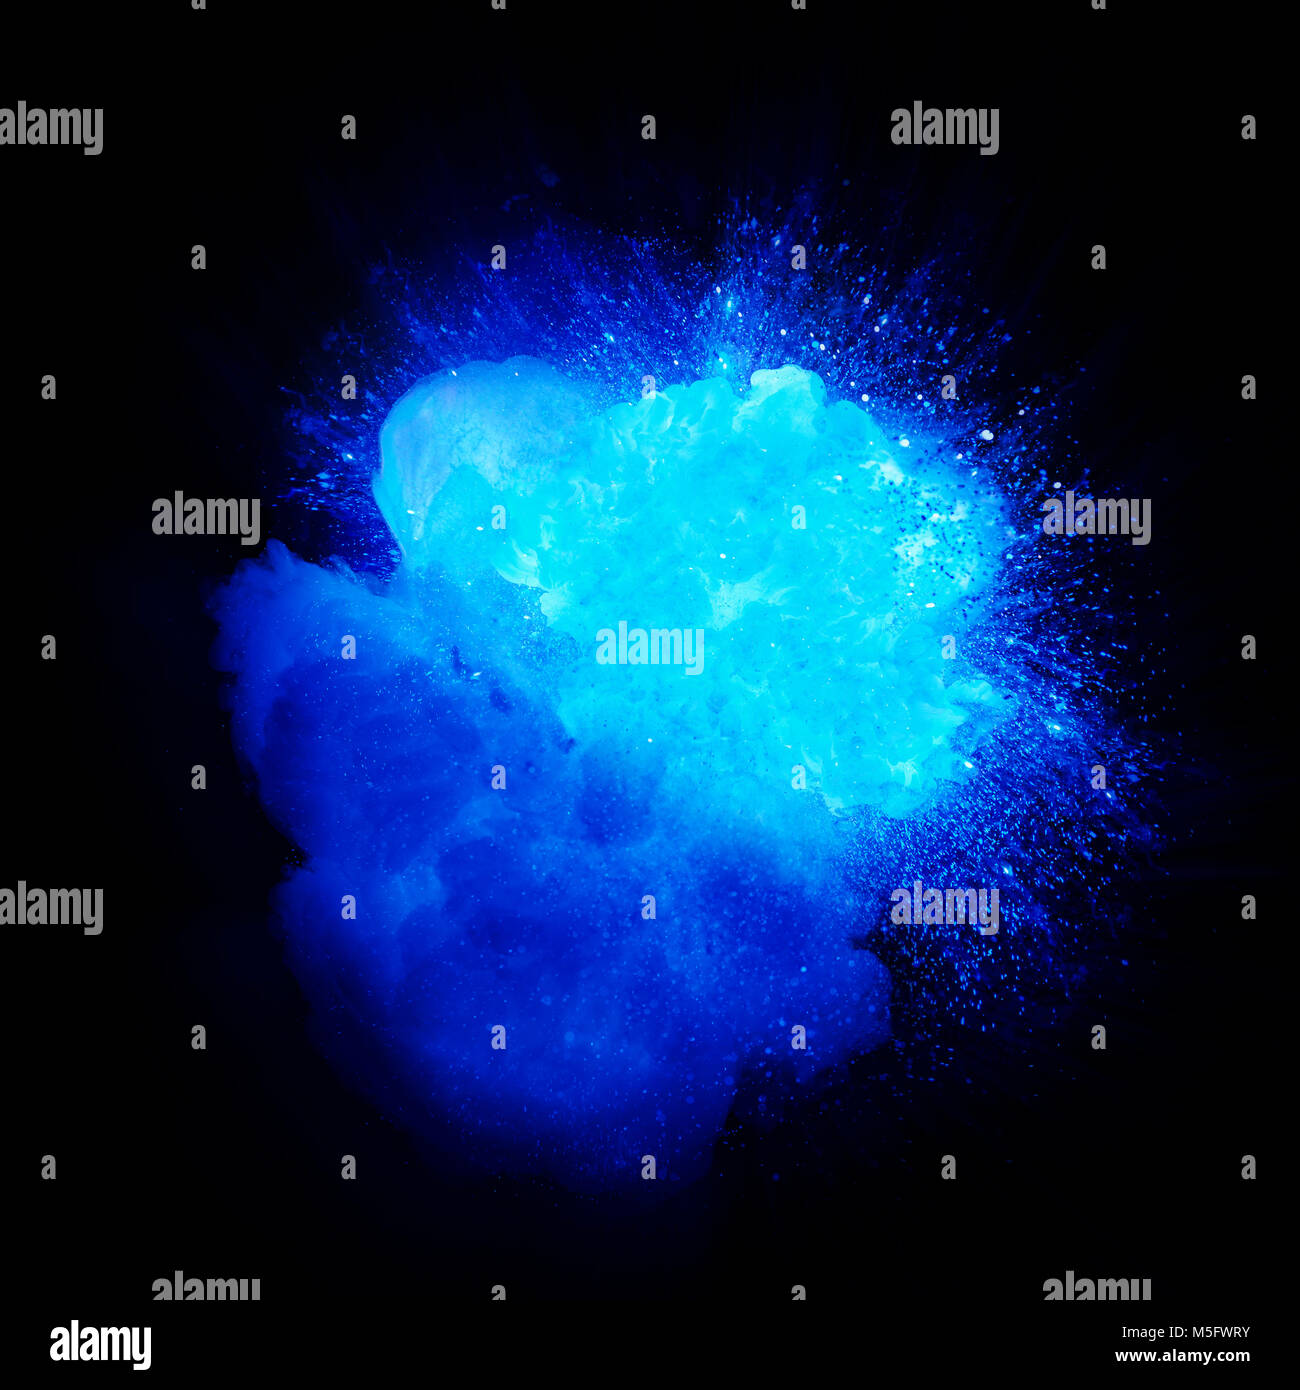 Blue fire explosion with sparks and smoke isolated on black background Stock Photo